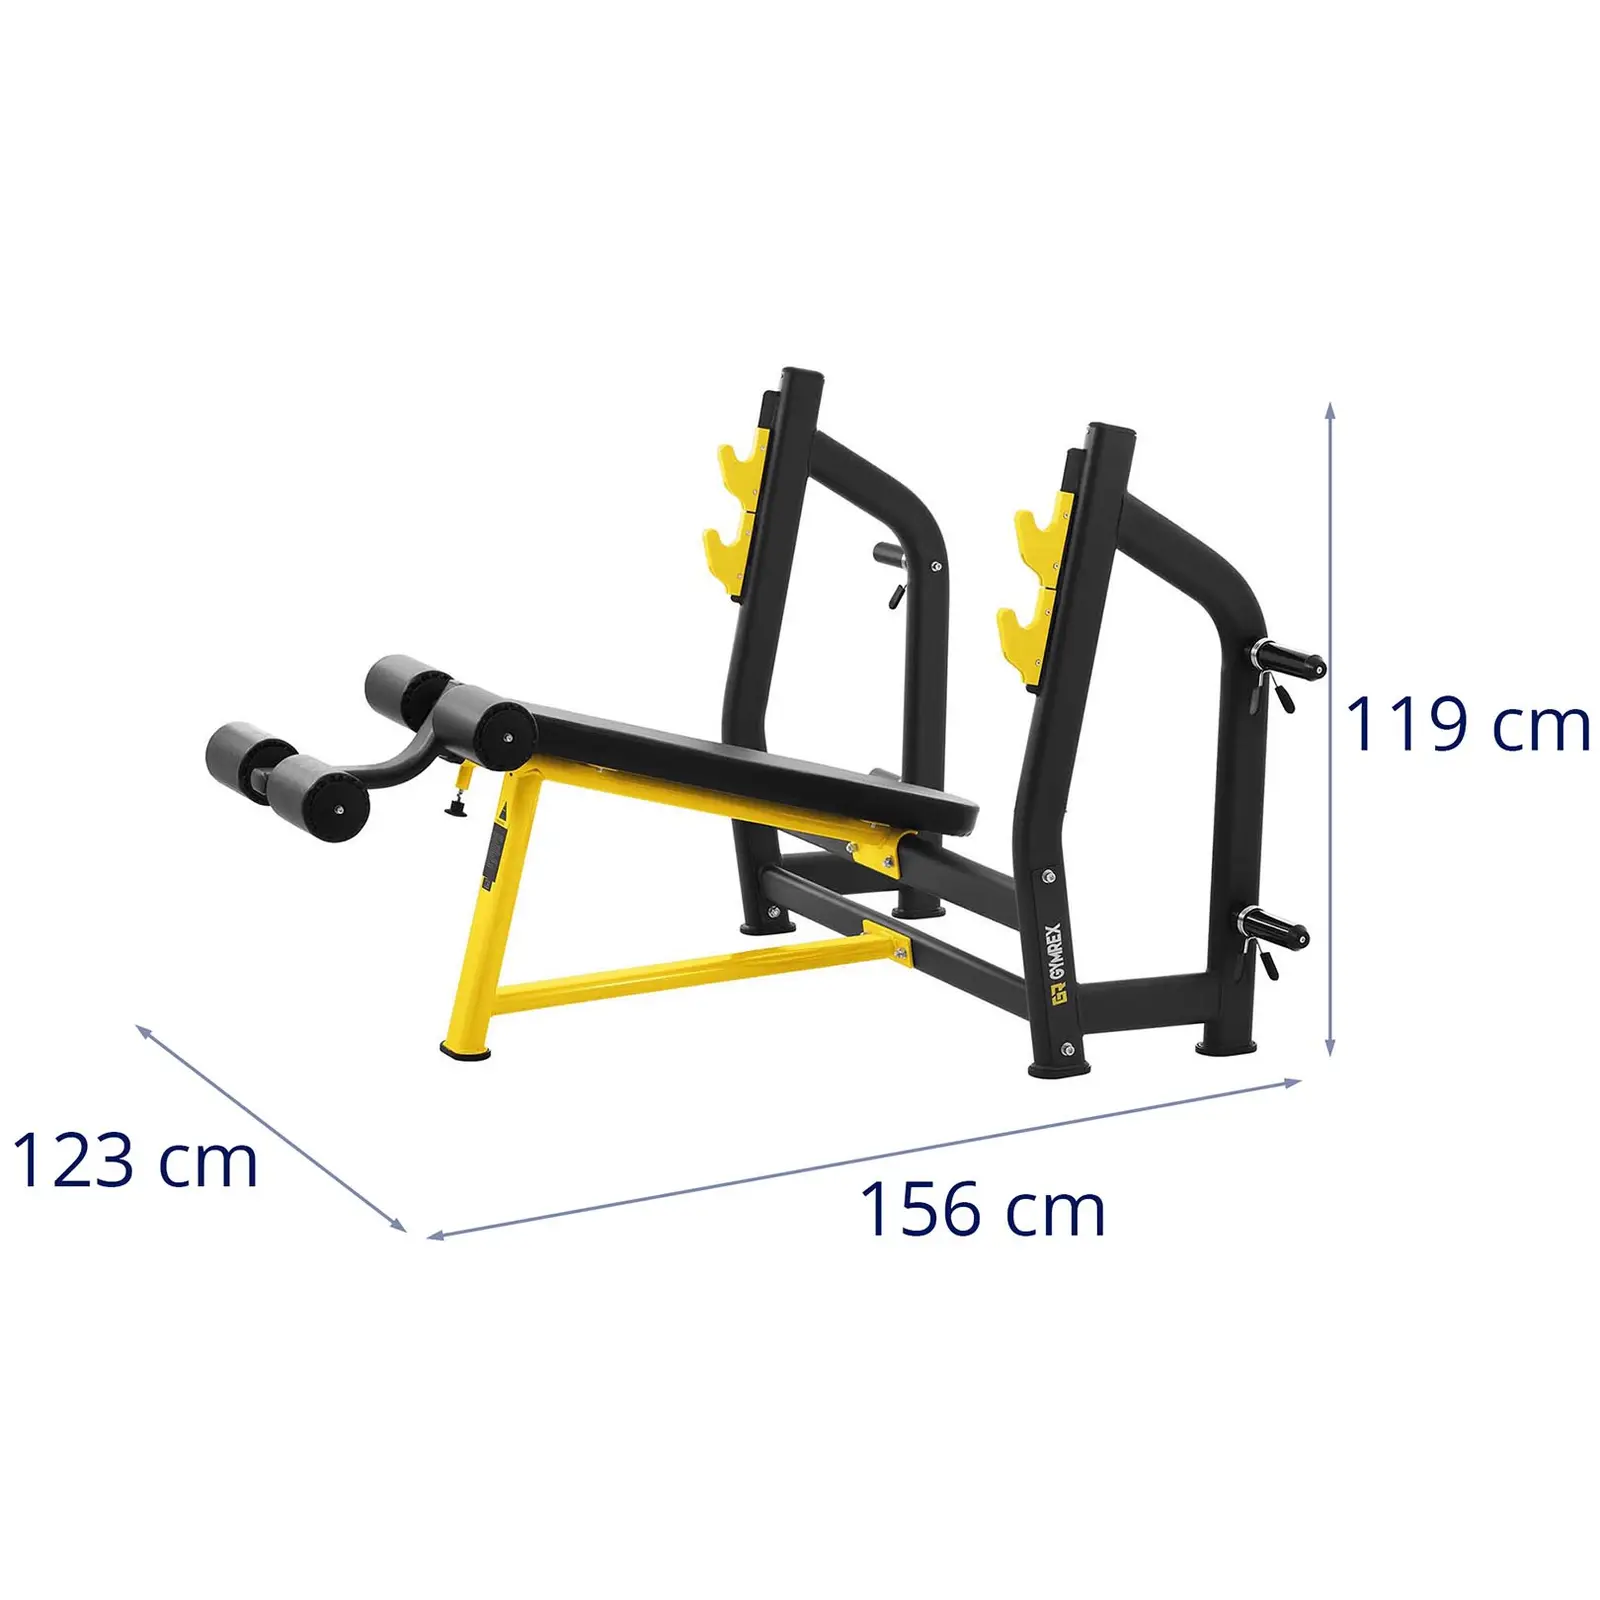 Factory second Weight Bench - 135 kg - 1080 x 270 mm